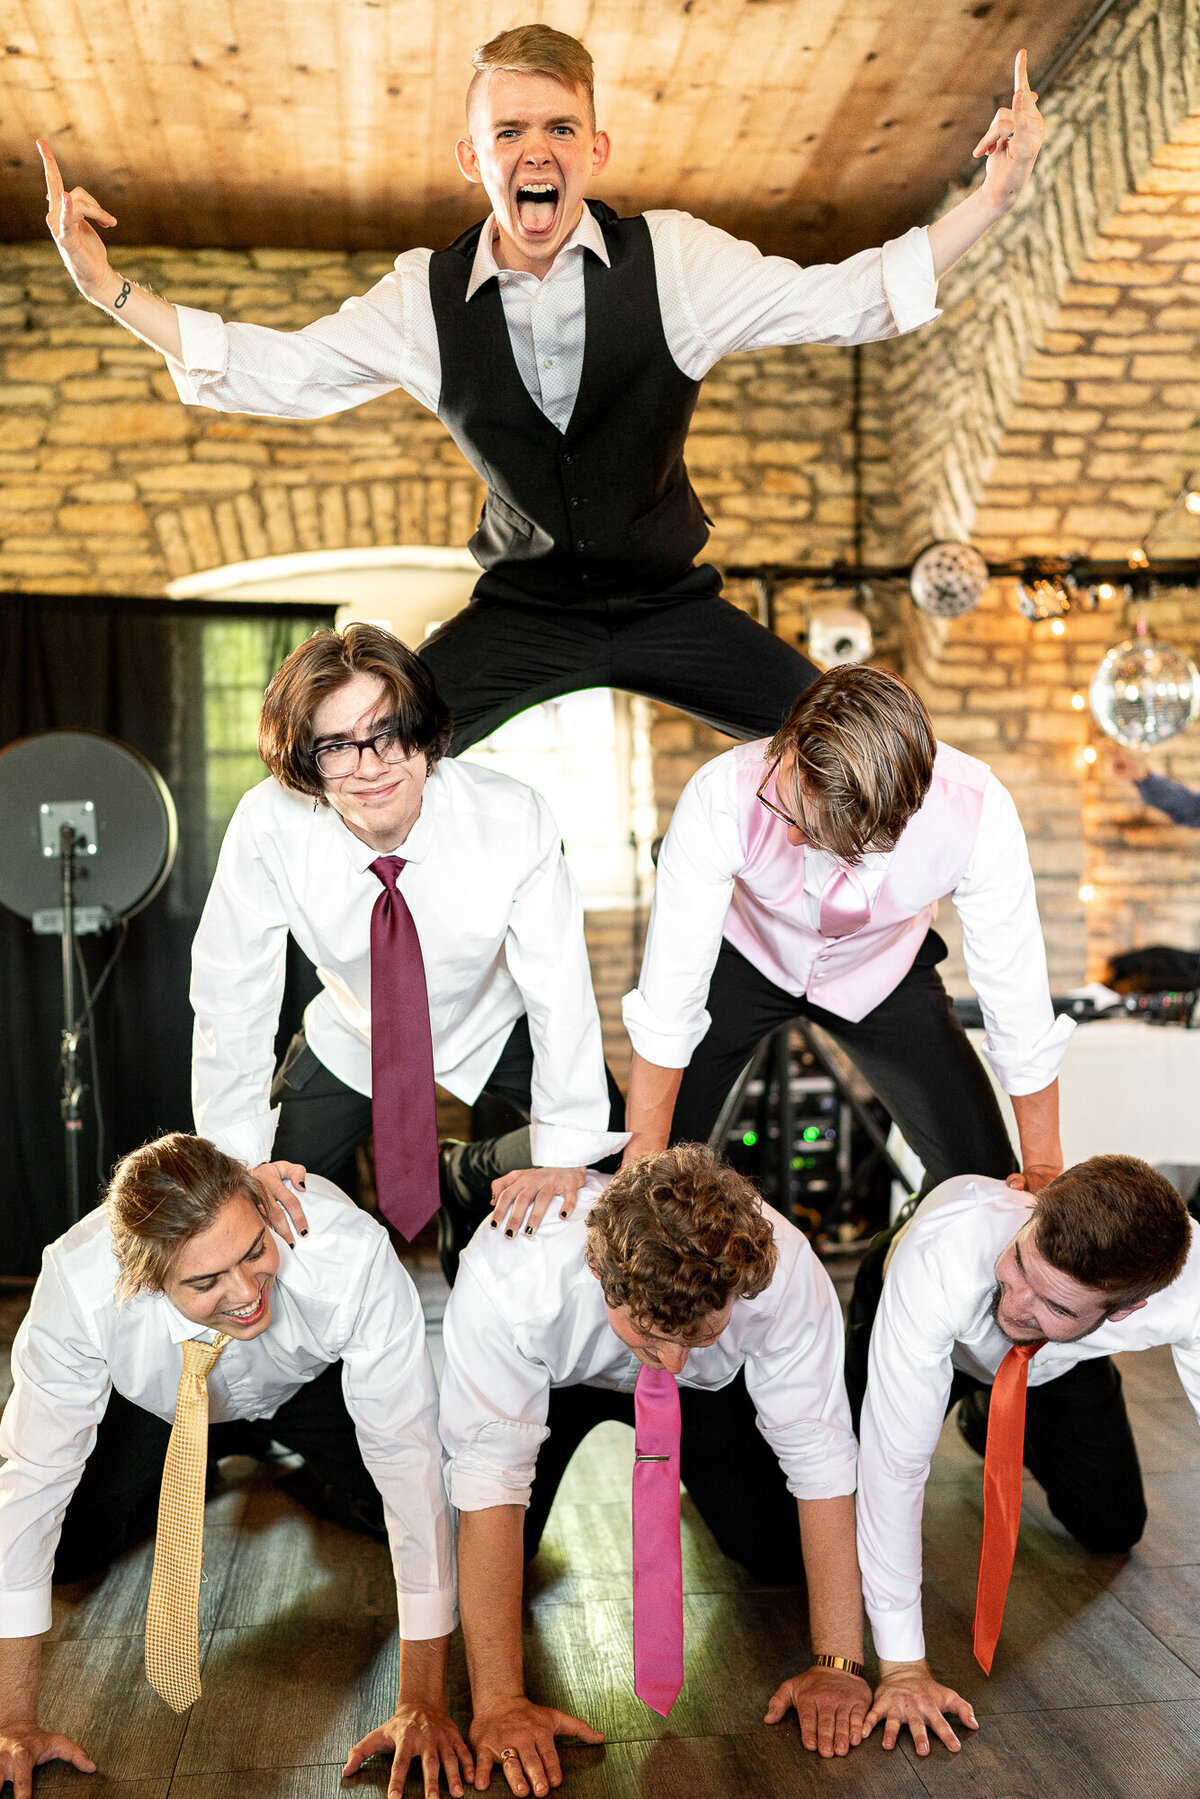 Groom stands on a pyramid of his groomsmen.